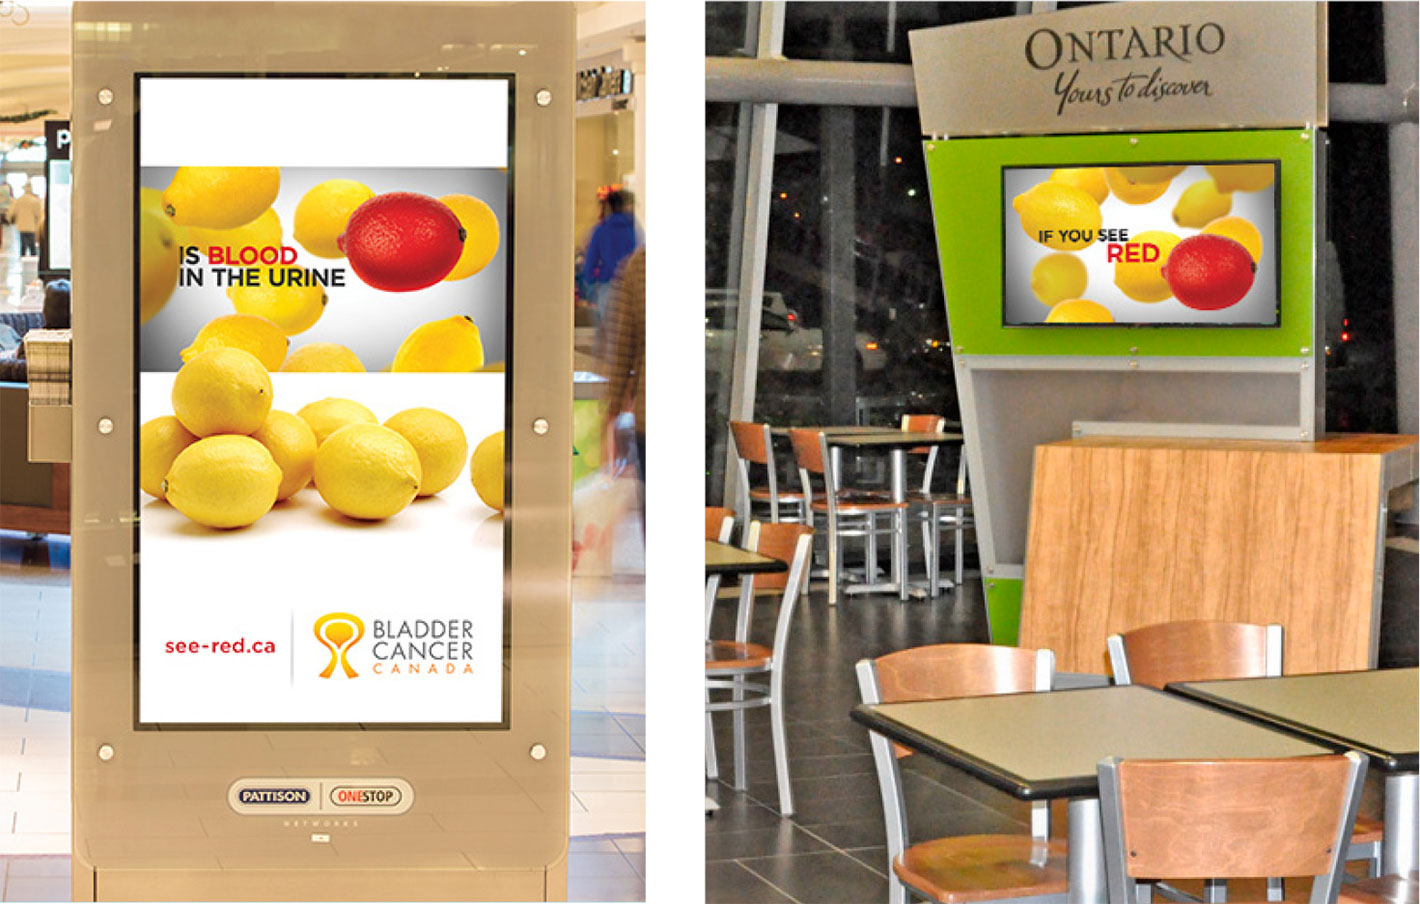 Bladder Cancer Canada PSA videos shown on a digital screen in a shopping mall and inside a popular highway rest stop